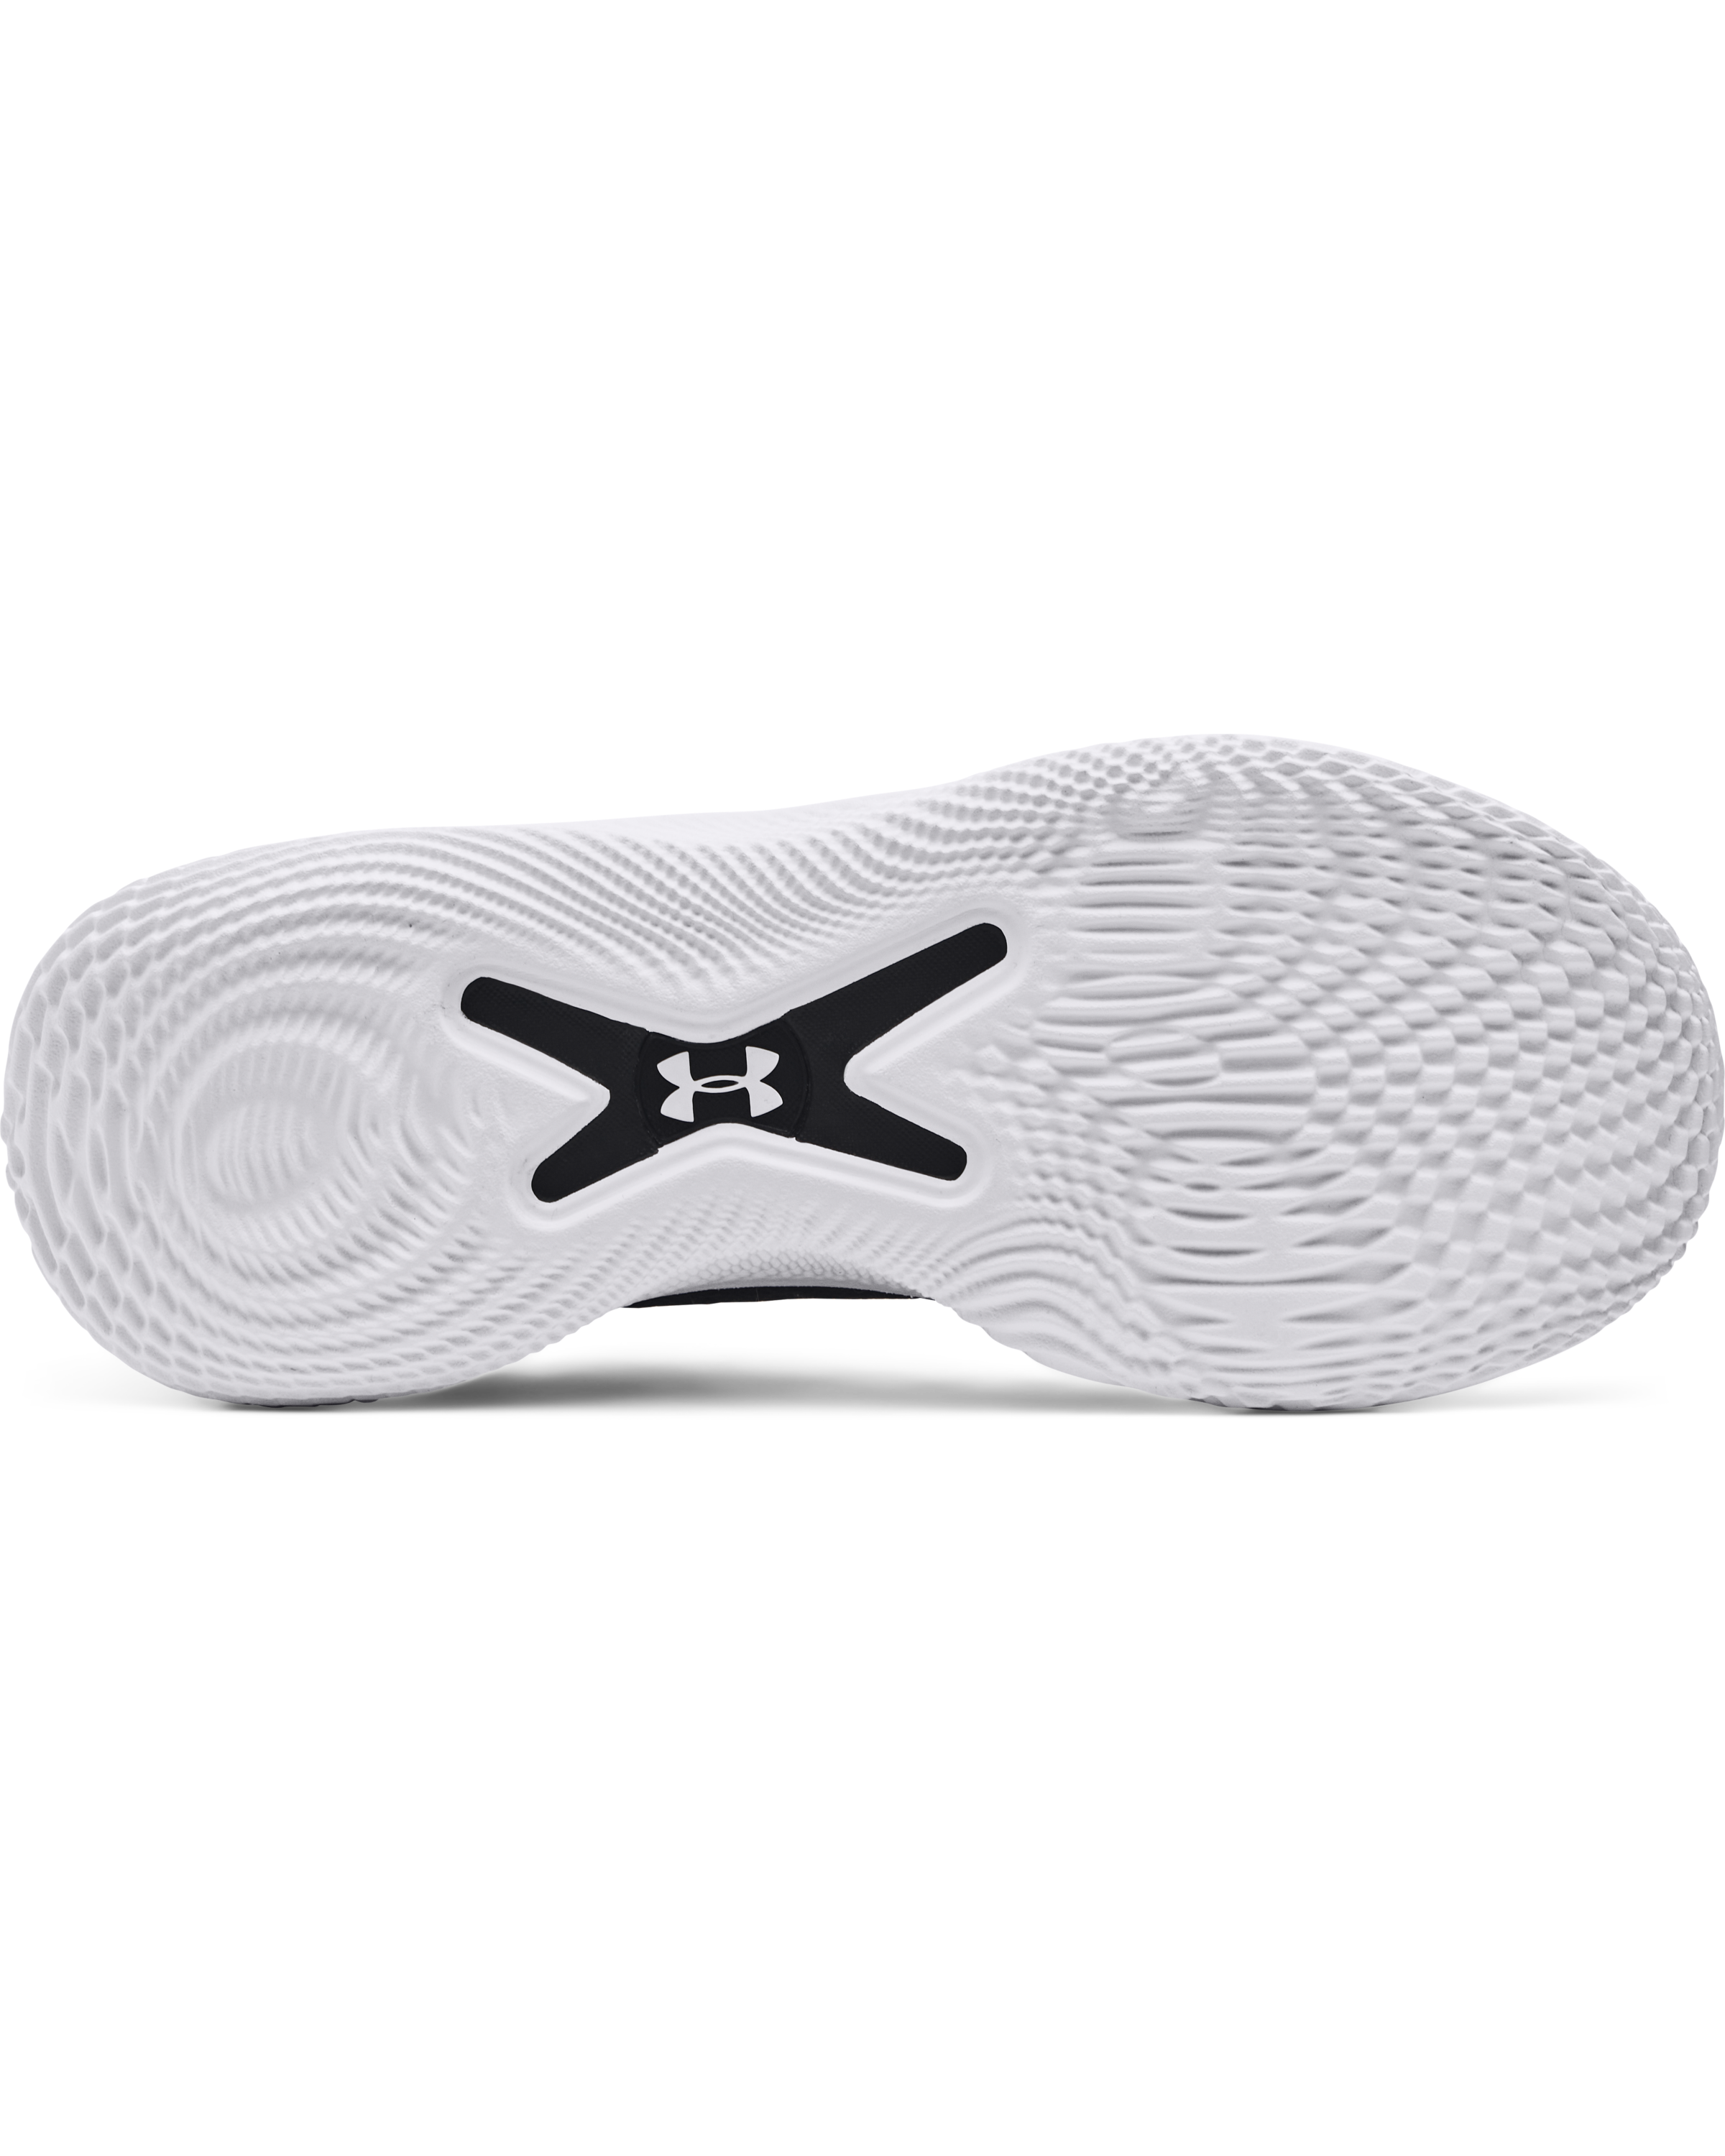 Men's Team Curry 10 Basketball Shoes from Under Armour